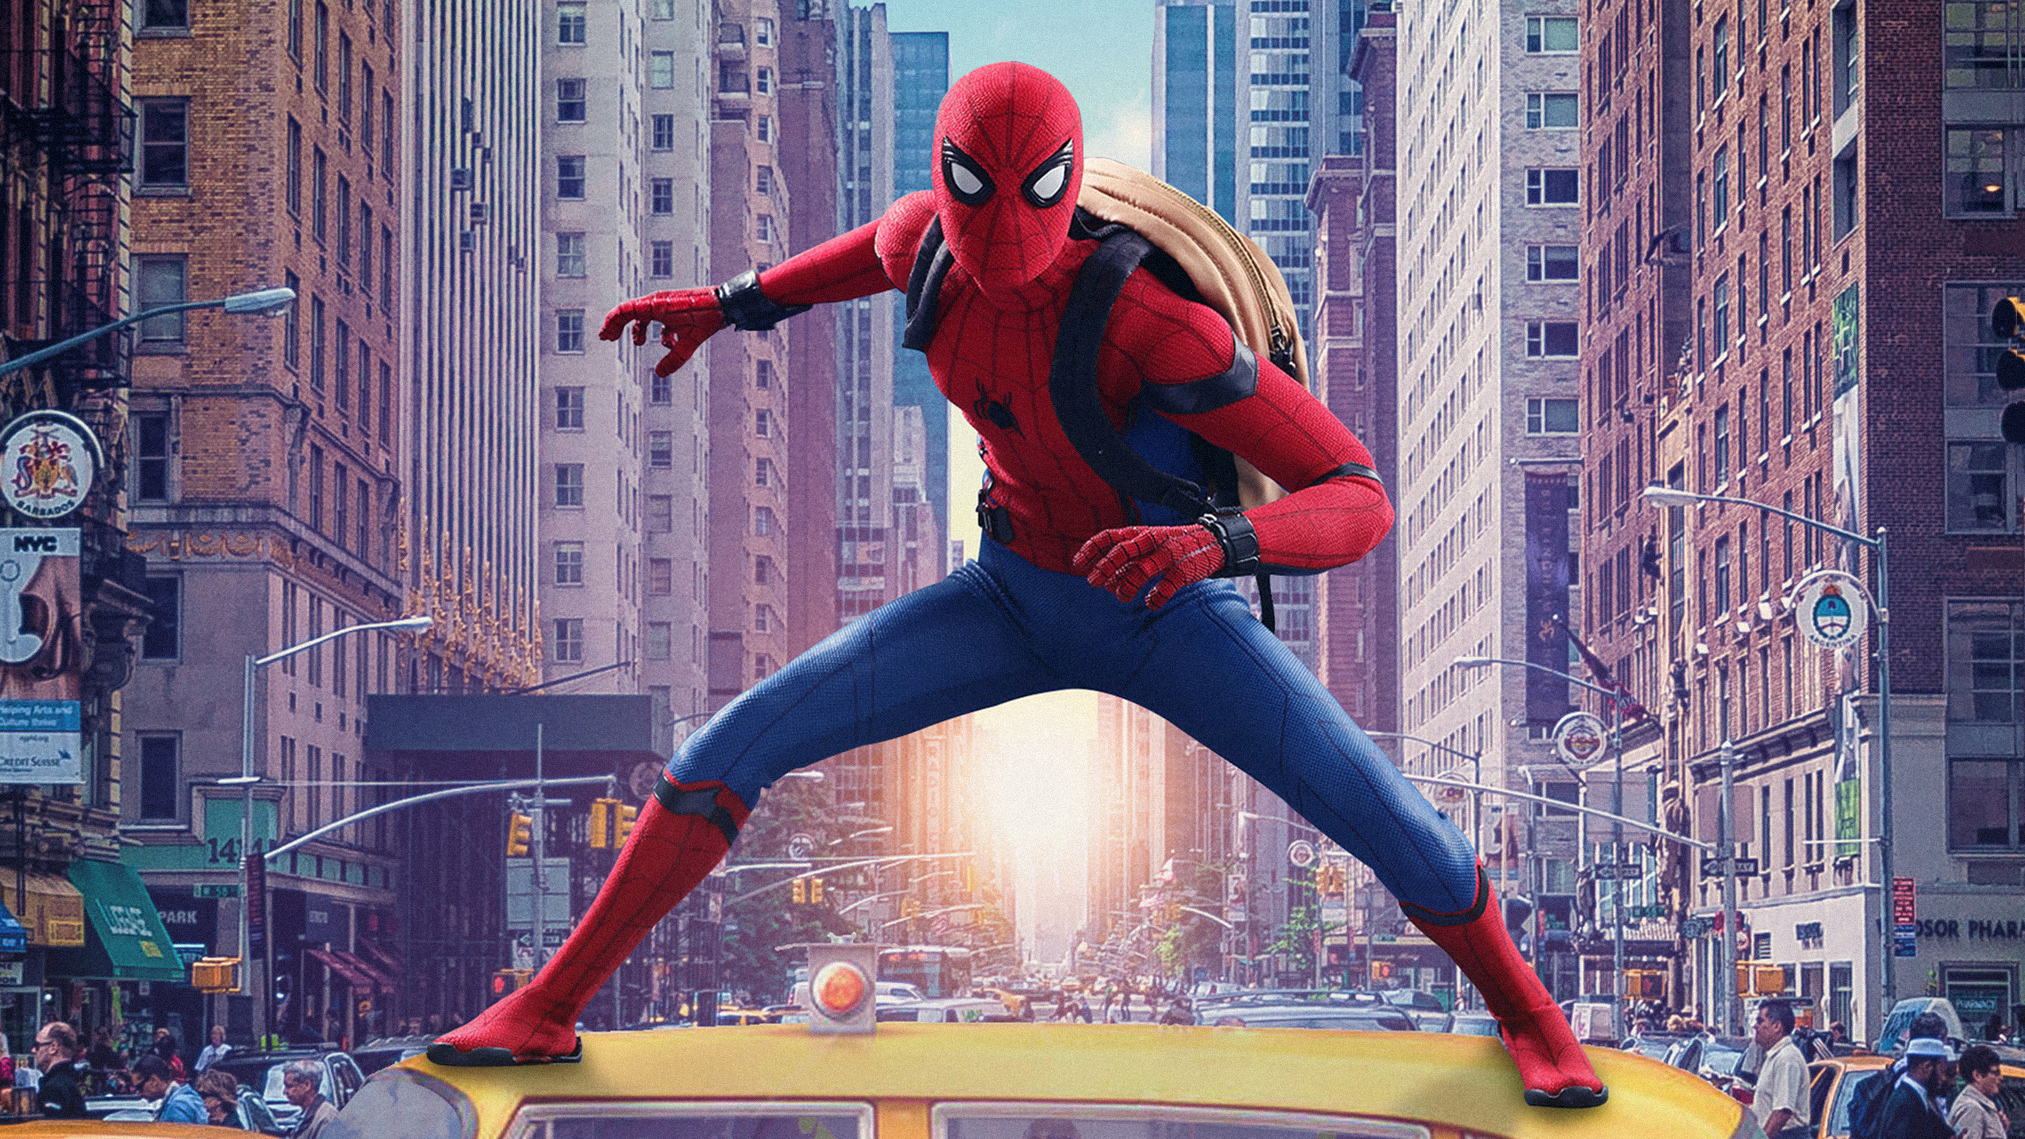 Spiderman Homecoming Movie Poster, HD Movies, 4k Wallpapers, Images